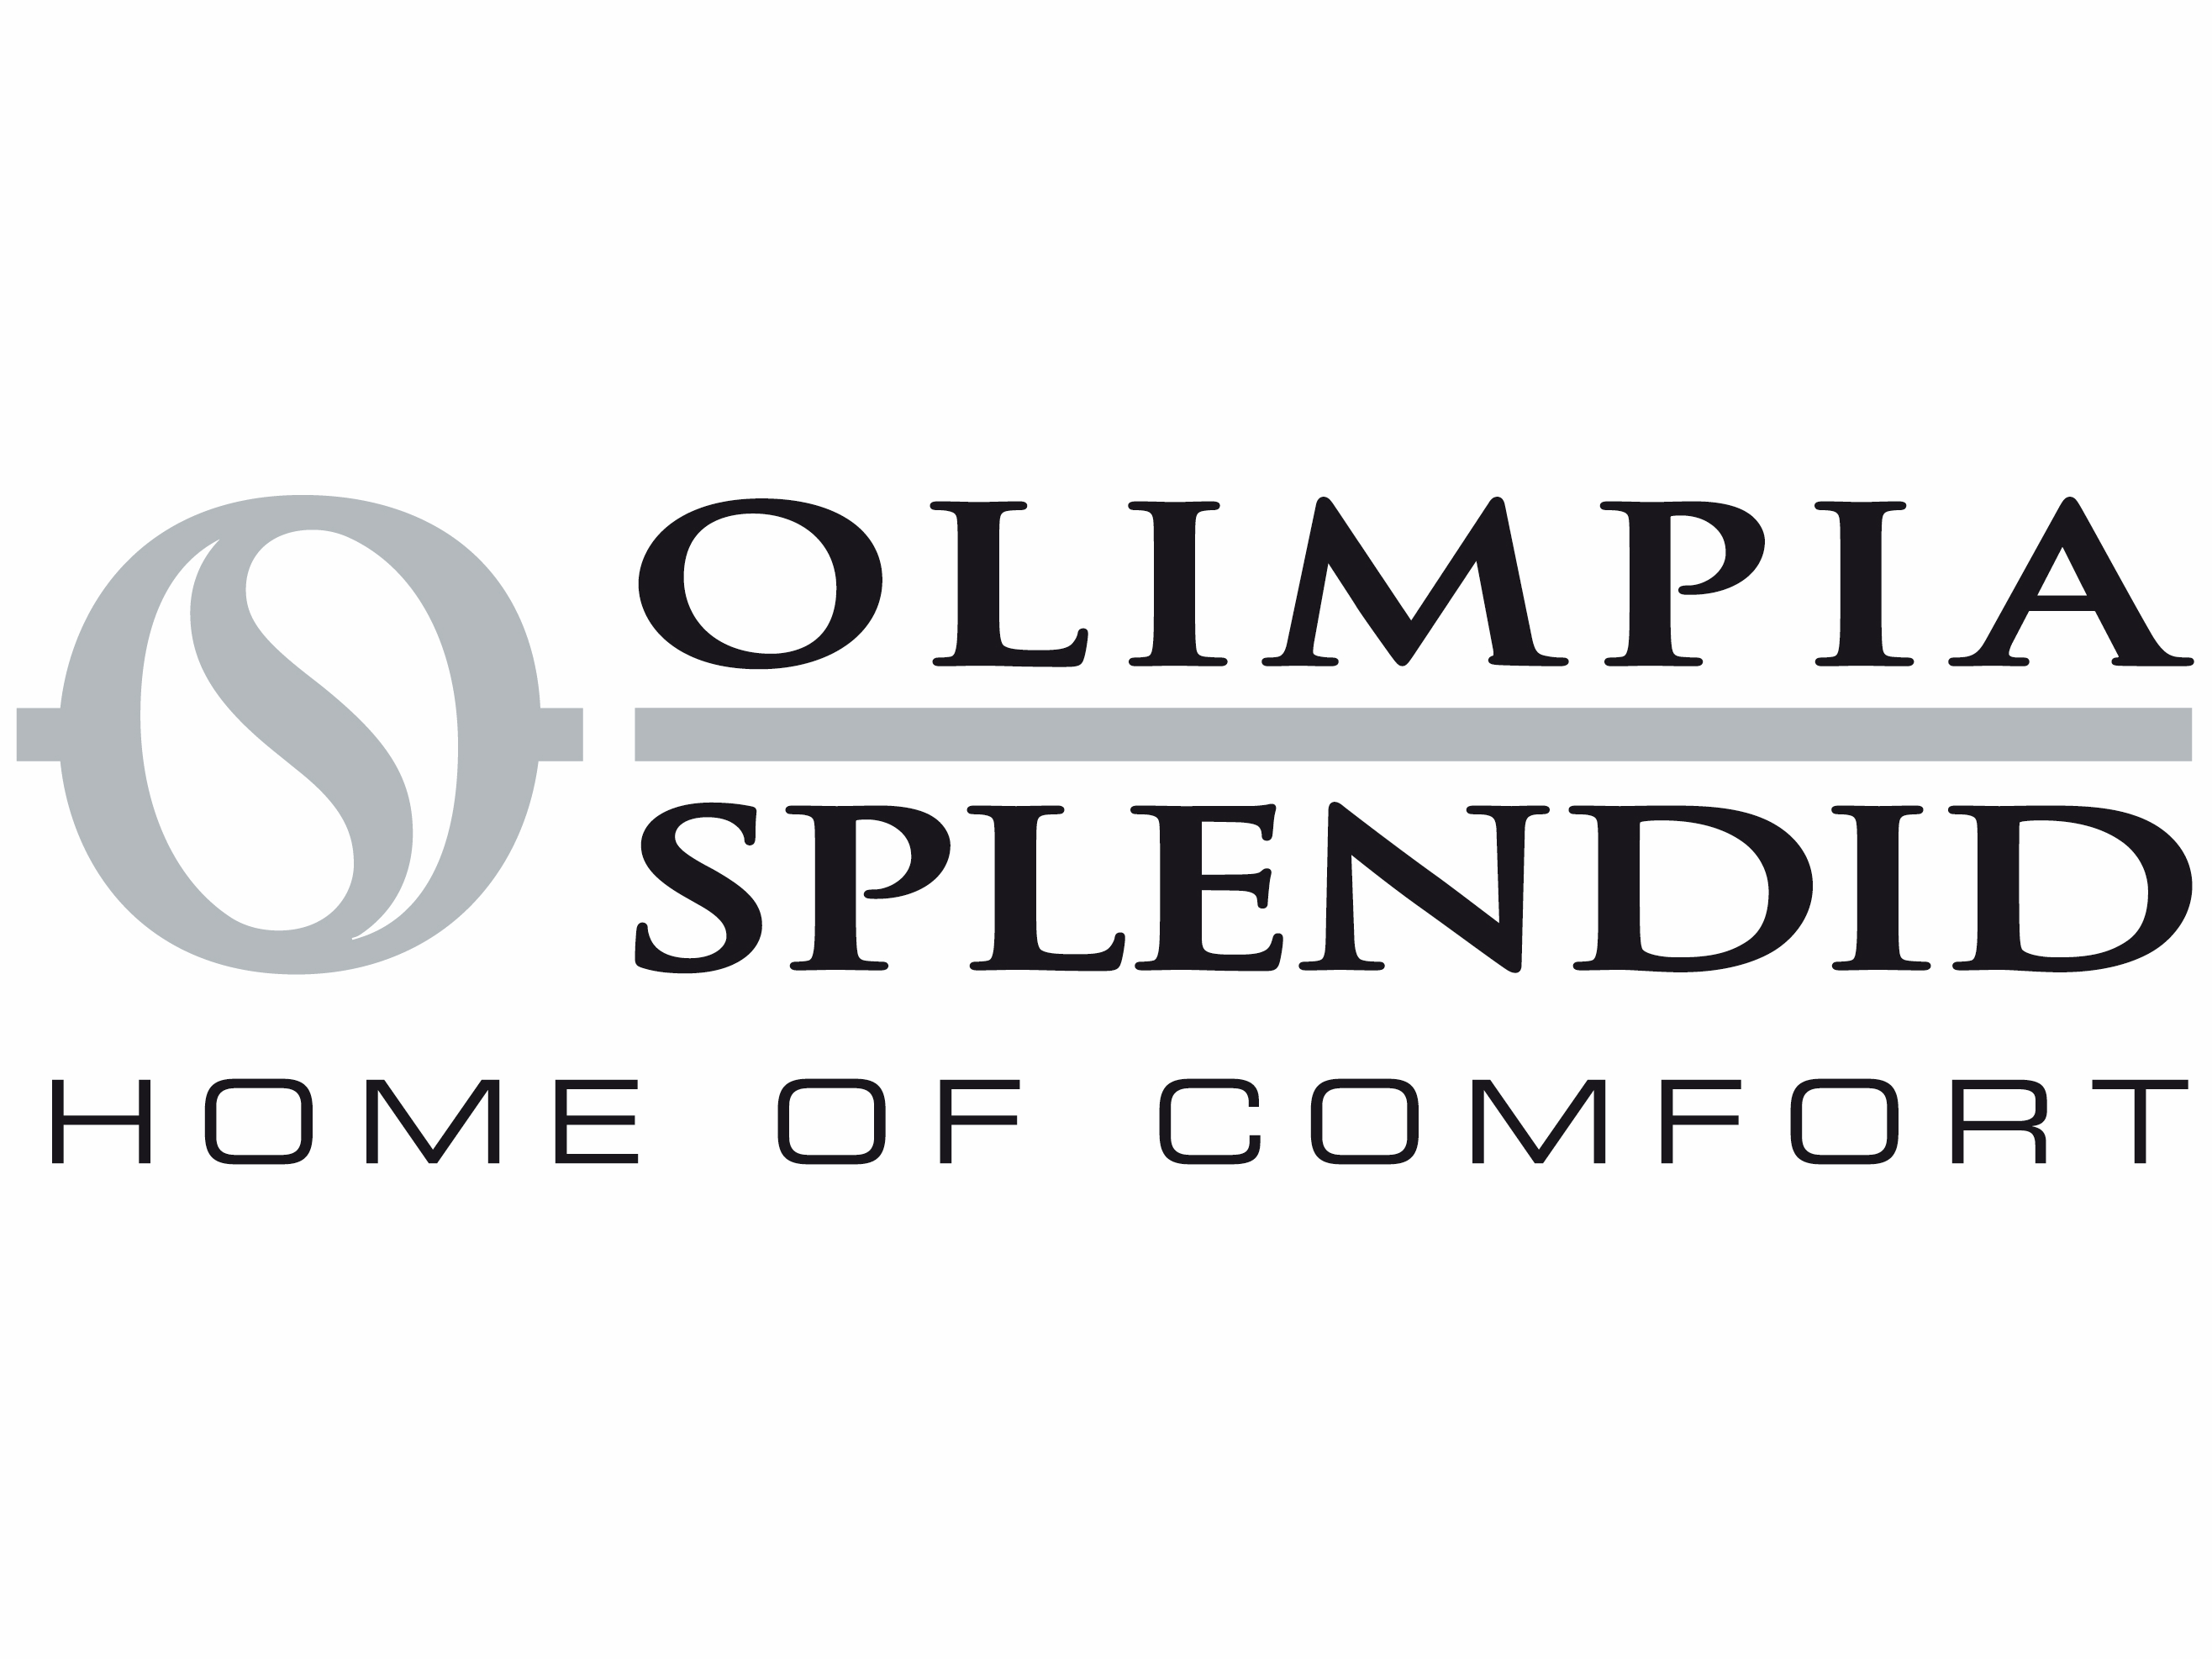 Splendid Logo - OLIMPIA SPLENDID. Heating And Air Conditioning Systems